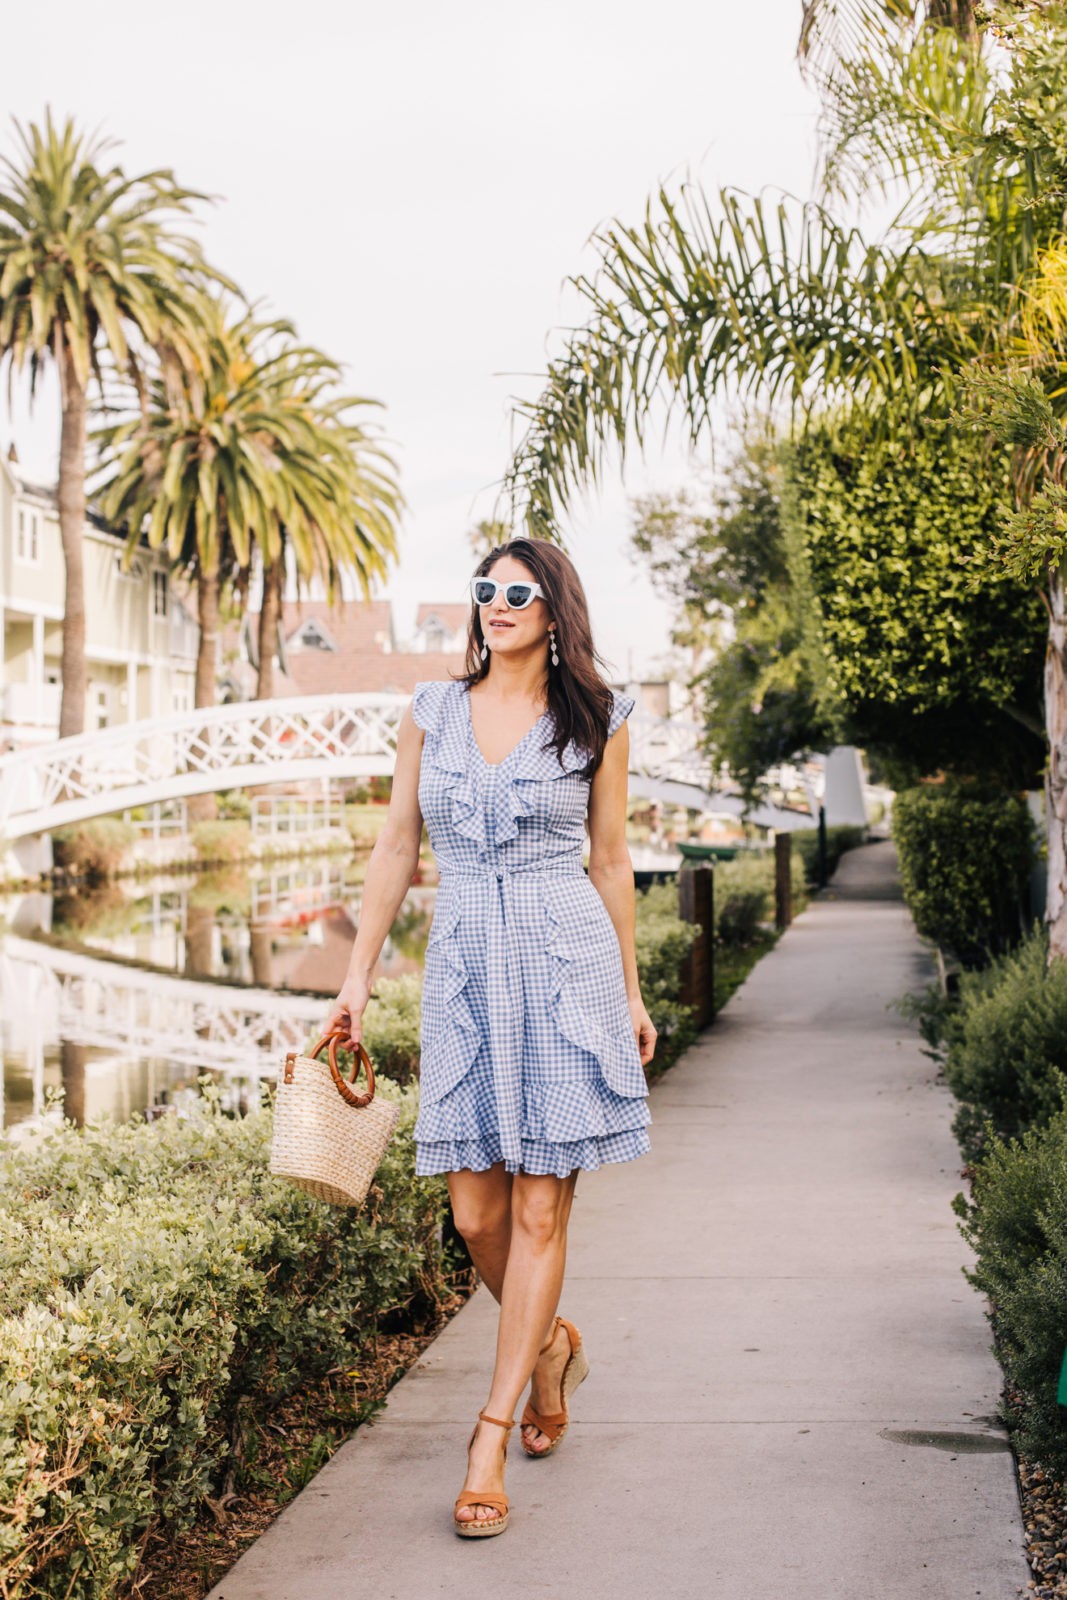 Stage Summer Moments, 2019 Summer Bucket List Moments by popular Los Angeles Lifestyle Blogger Laura Lily: image of woman next to Venice, California canals and wearing a blue and white gingham ruffle wrap dress, white sunglasses, brown espadrilles and holding a straw tote. 